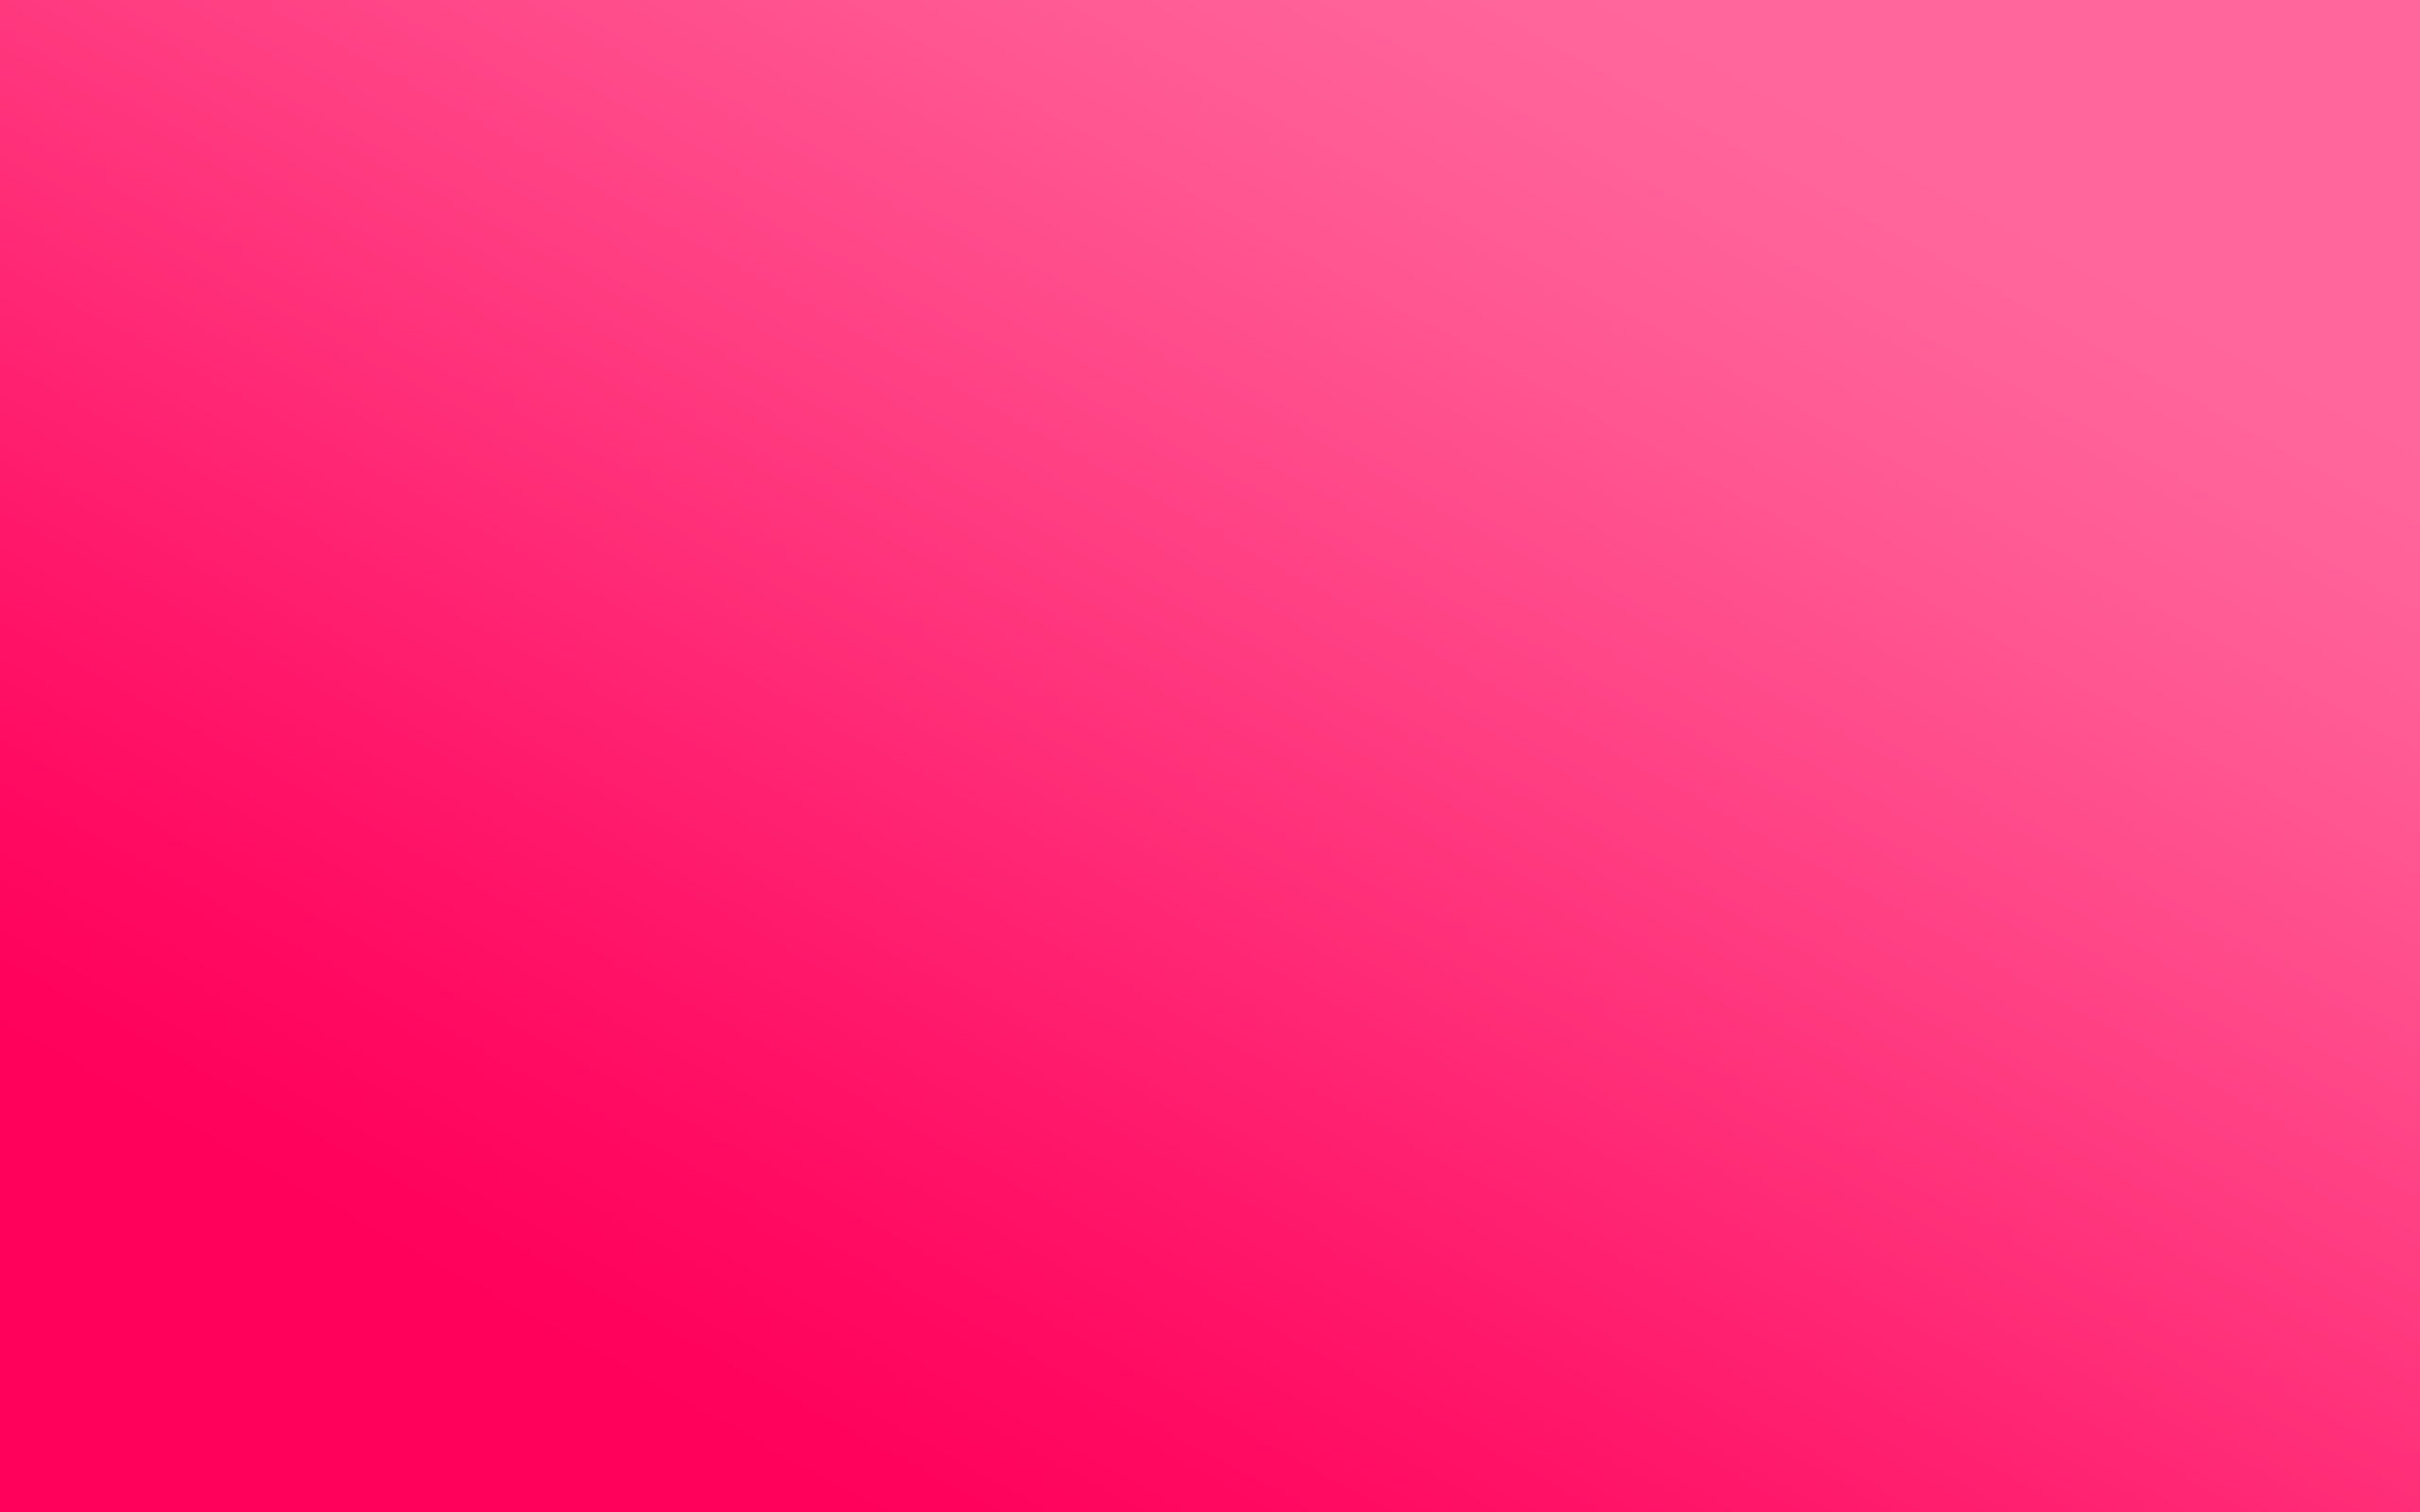 File Name 870499 Pink Solid Color HD Wallpapers Backgrounds